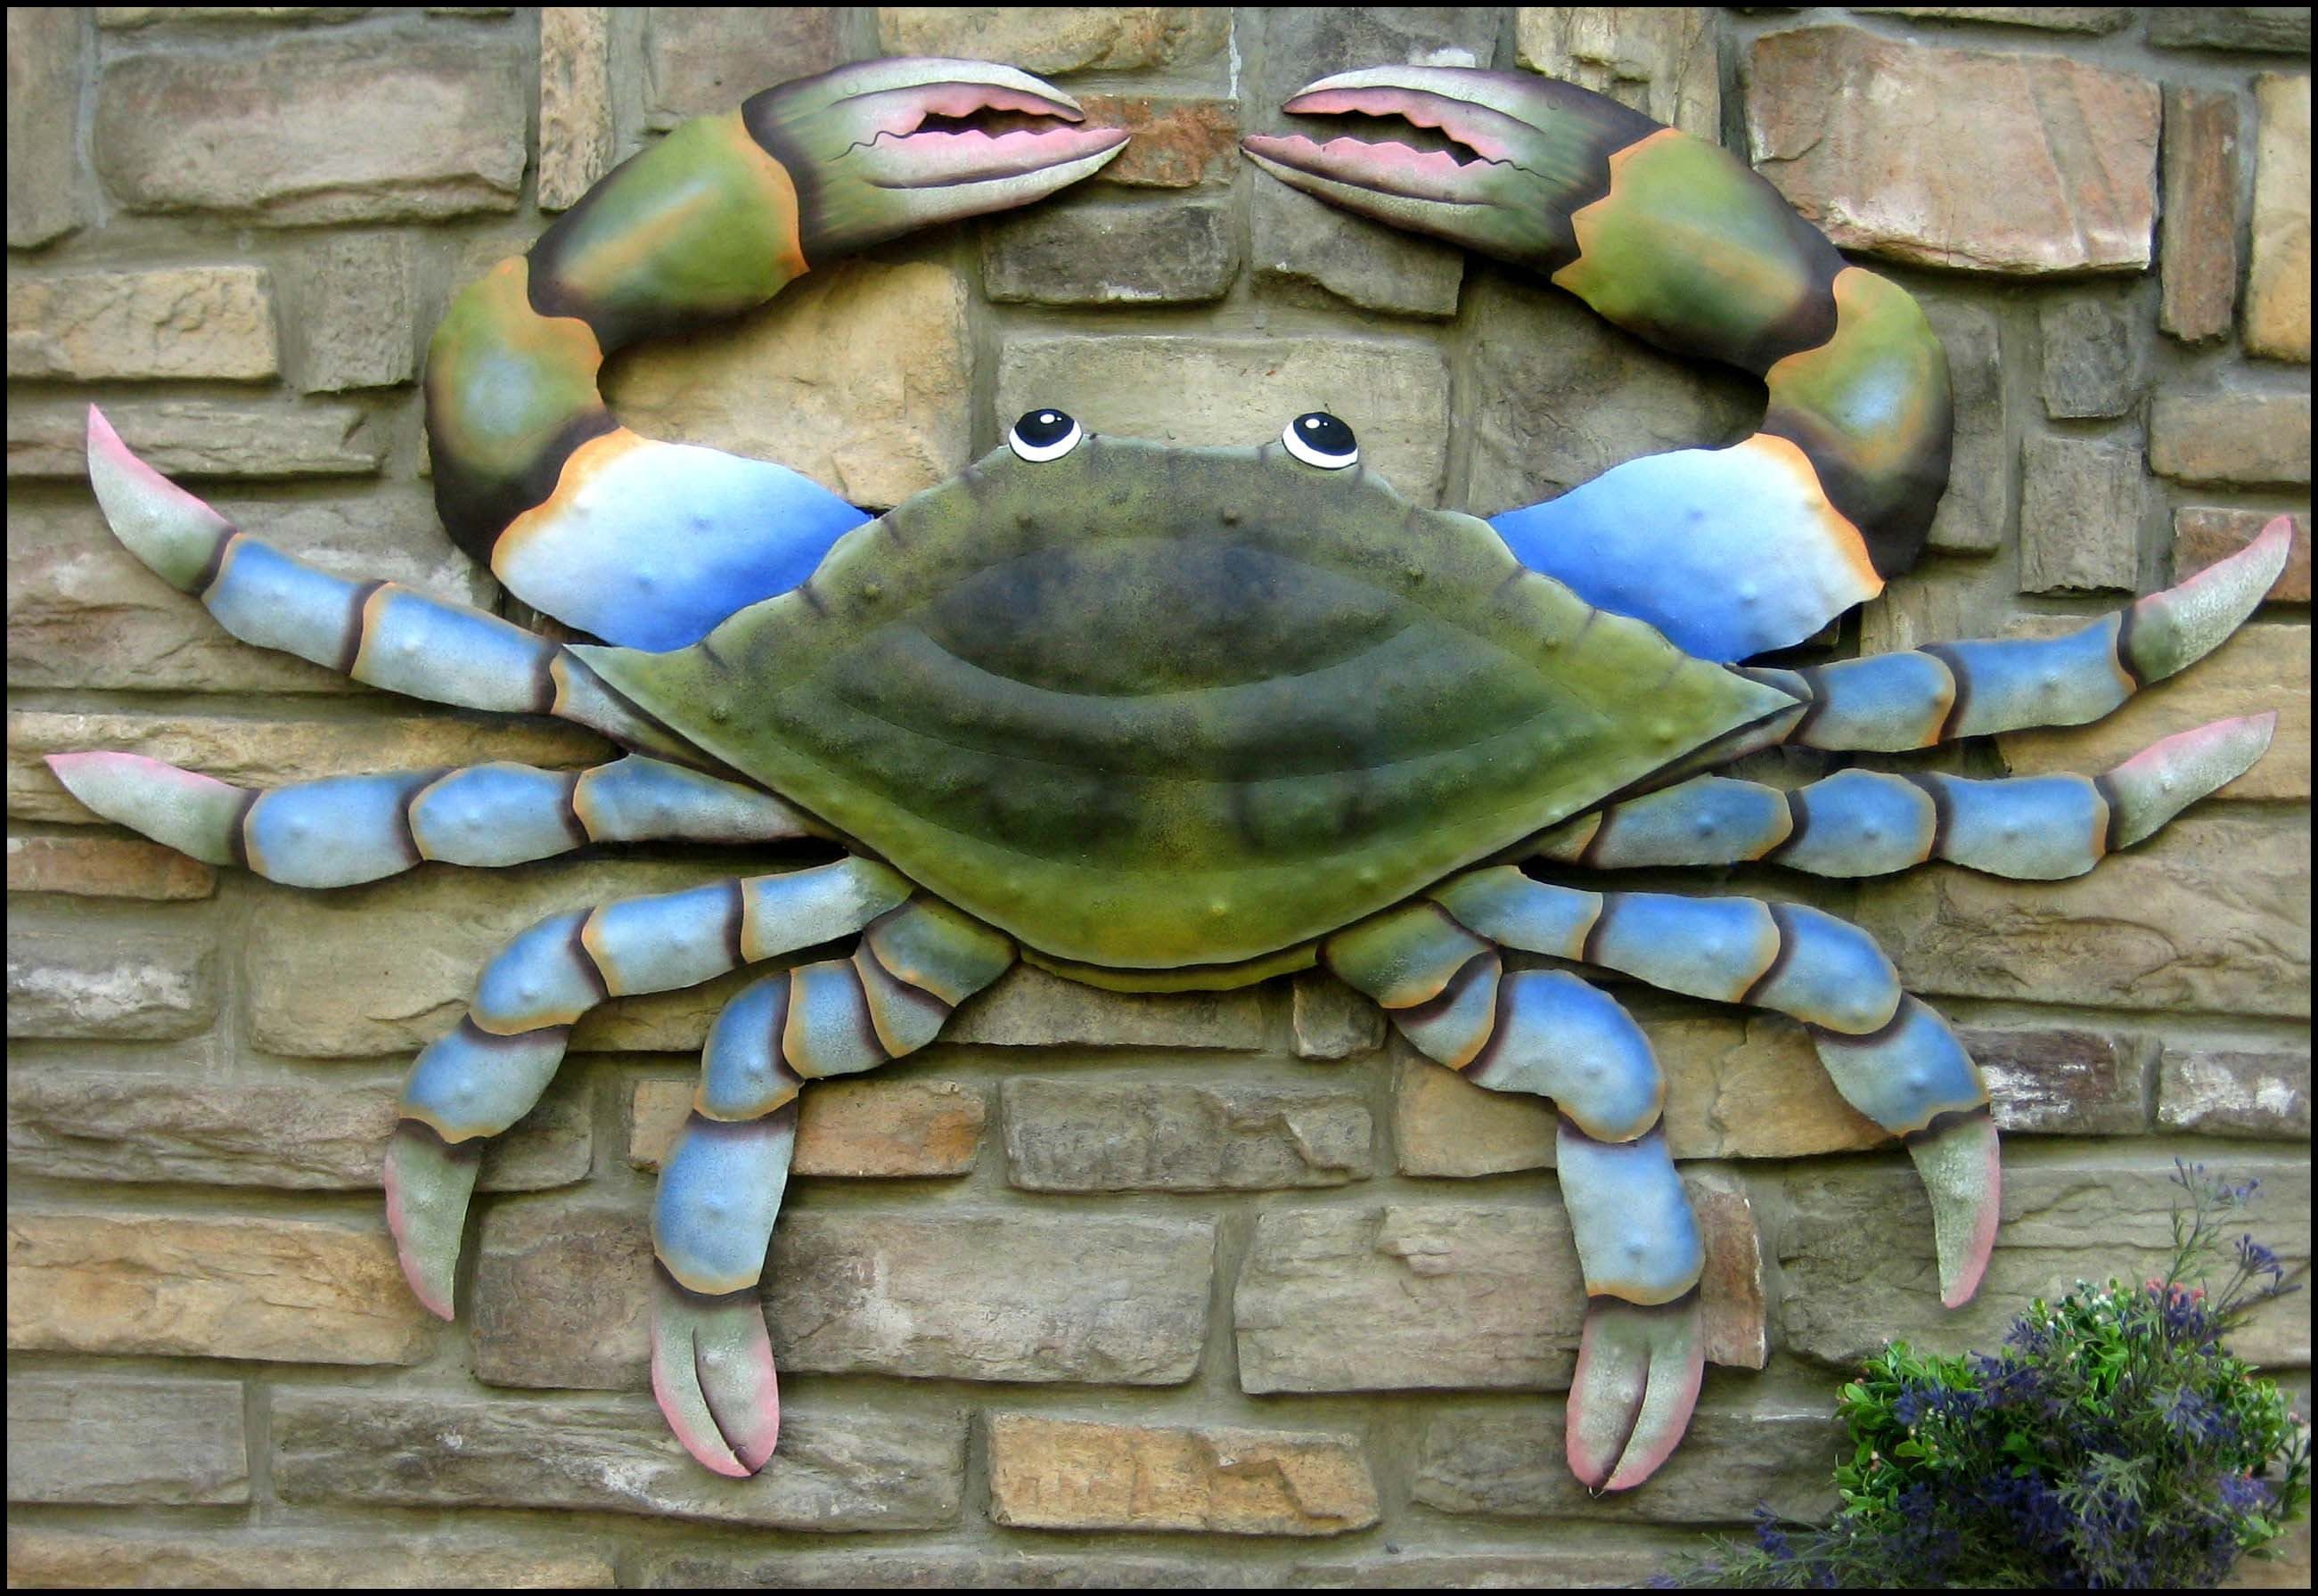 Blue Crab Nautical Wall Hanging Metal Art Tropical Decor – Etsy With Regard To Most Recent Crab Wall Art (Gallery 4 of 20)